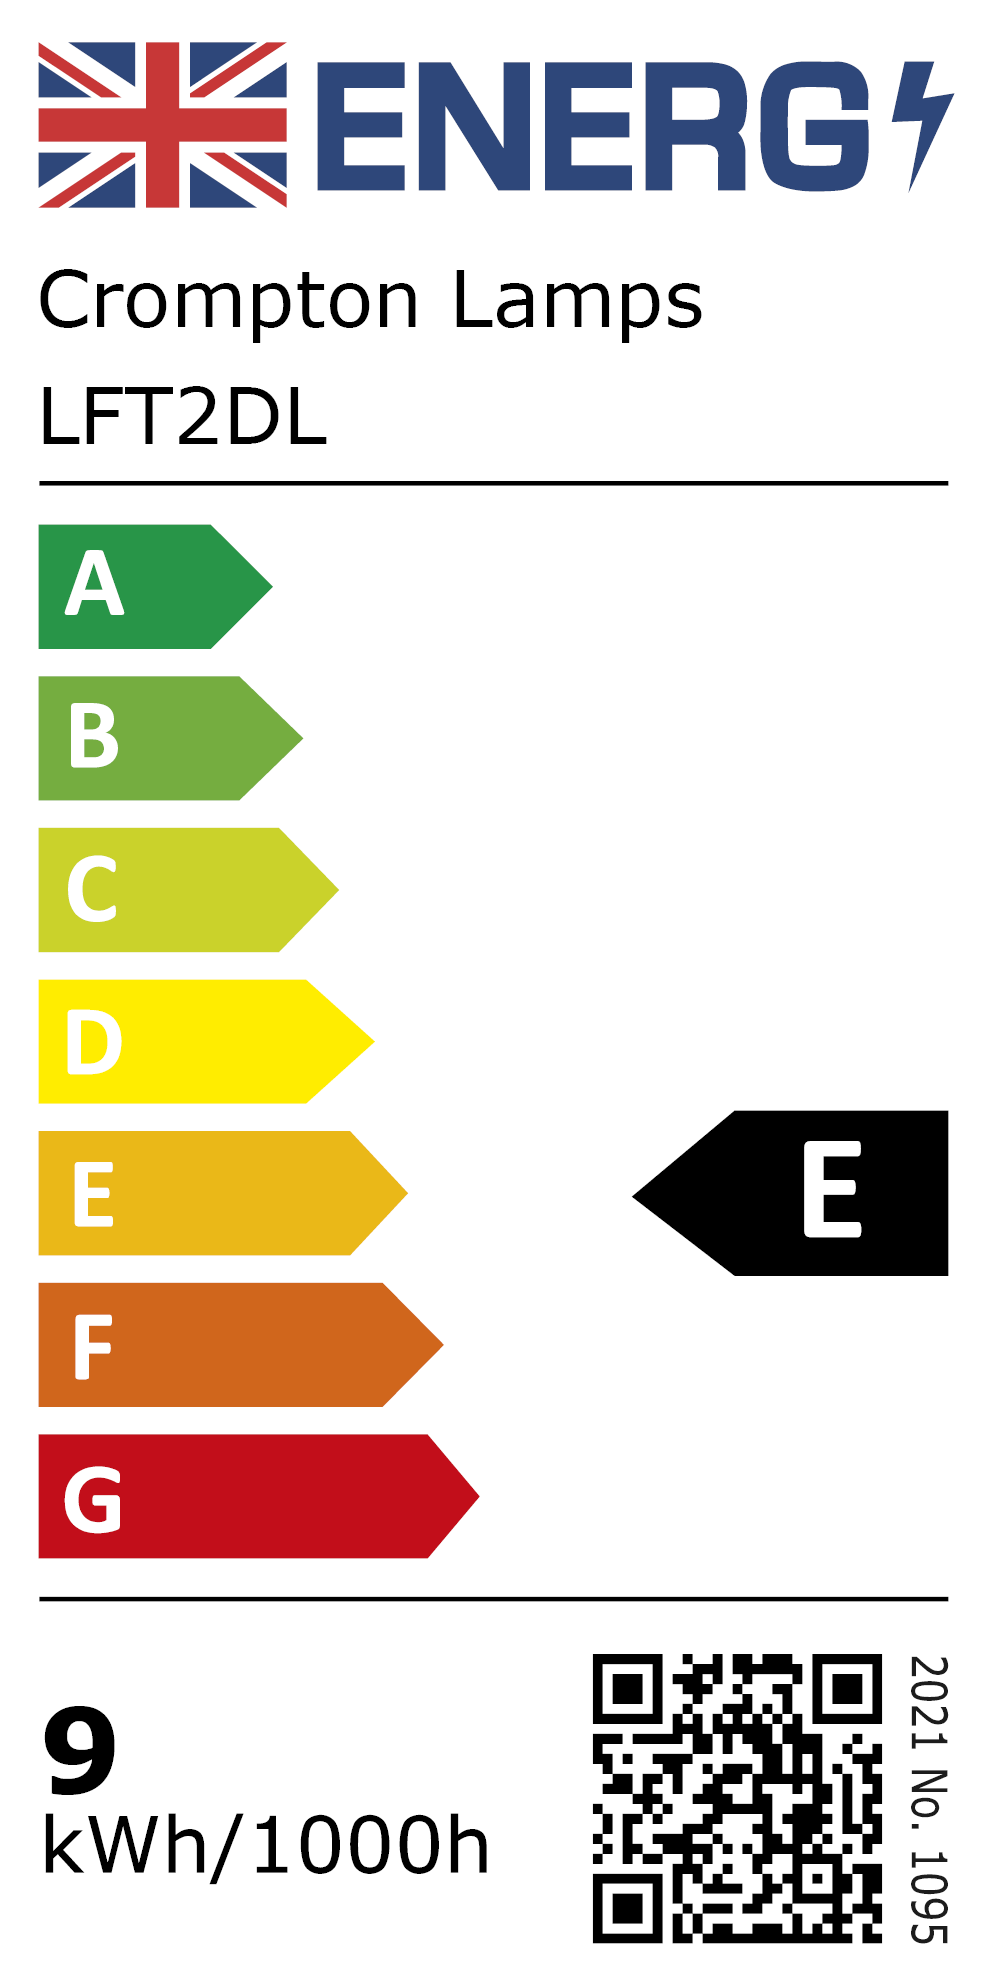 New 2021 Energy Rating Label: Stock Code LFT2DL